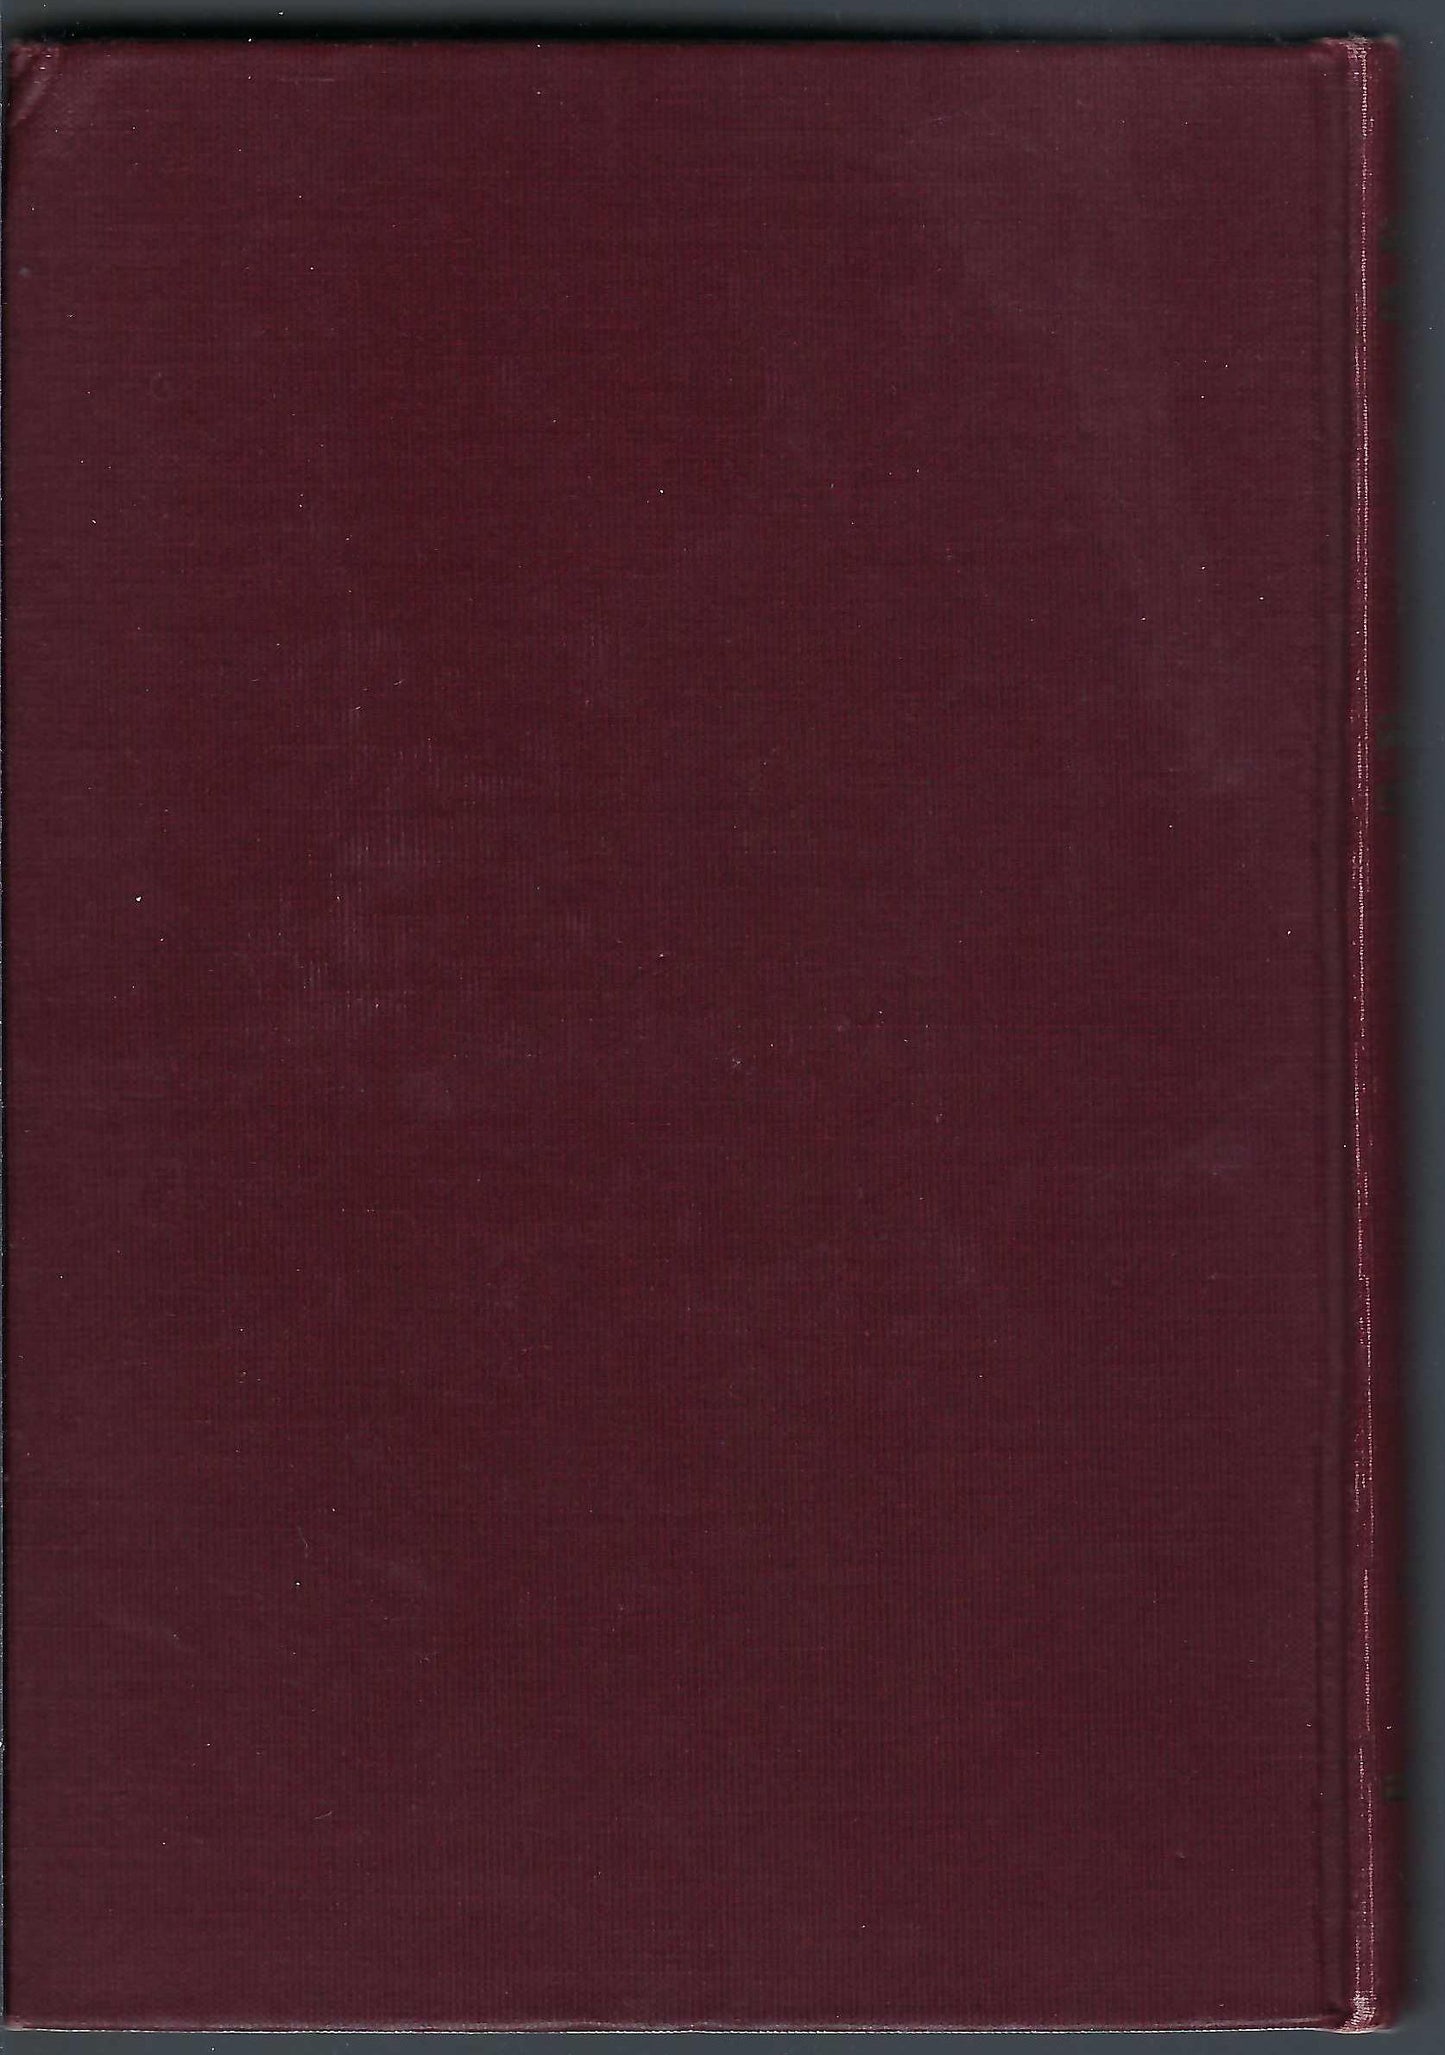 Whirligigs rear cover